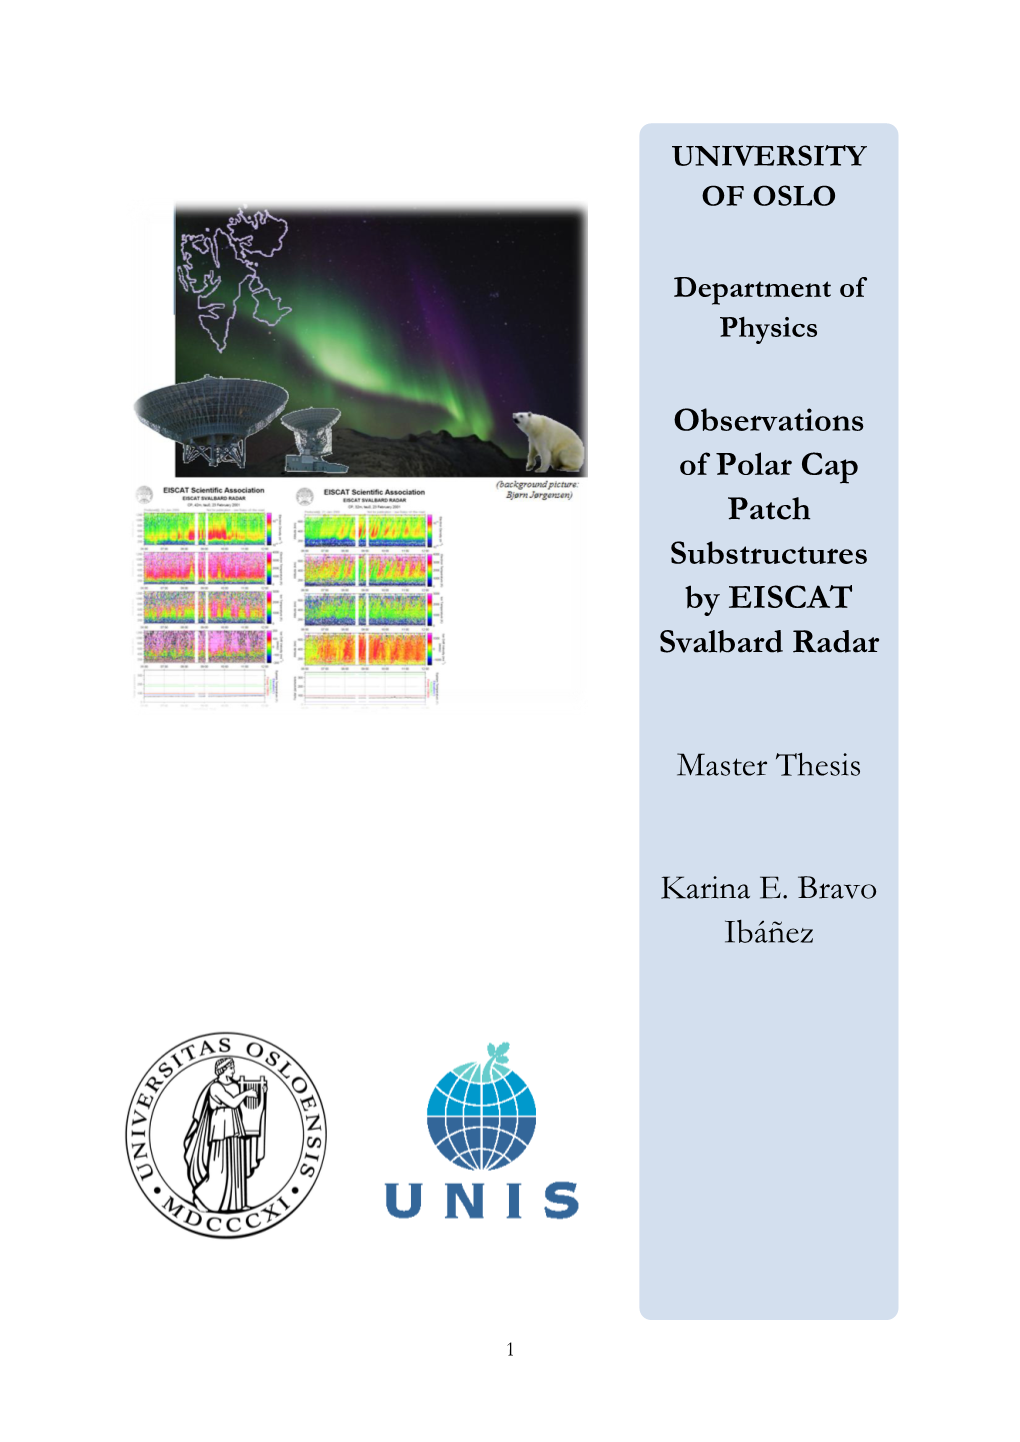 Observations of Polar Cap Patch Substructures by EISCAT Svalbard Radar